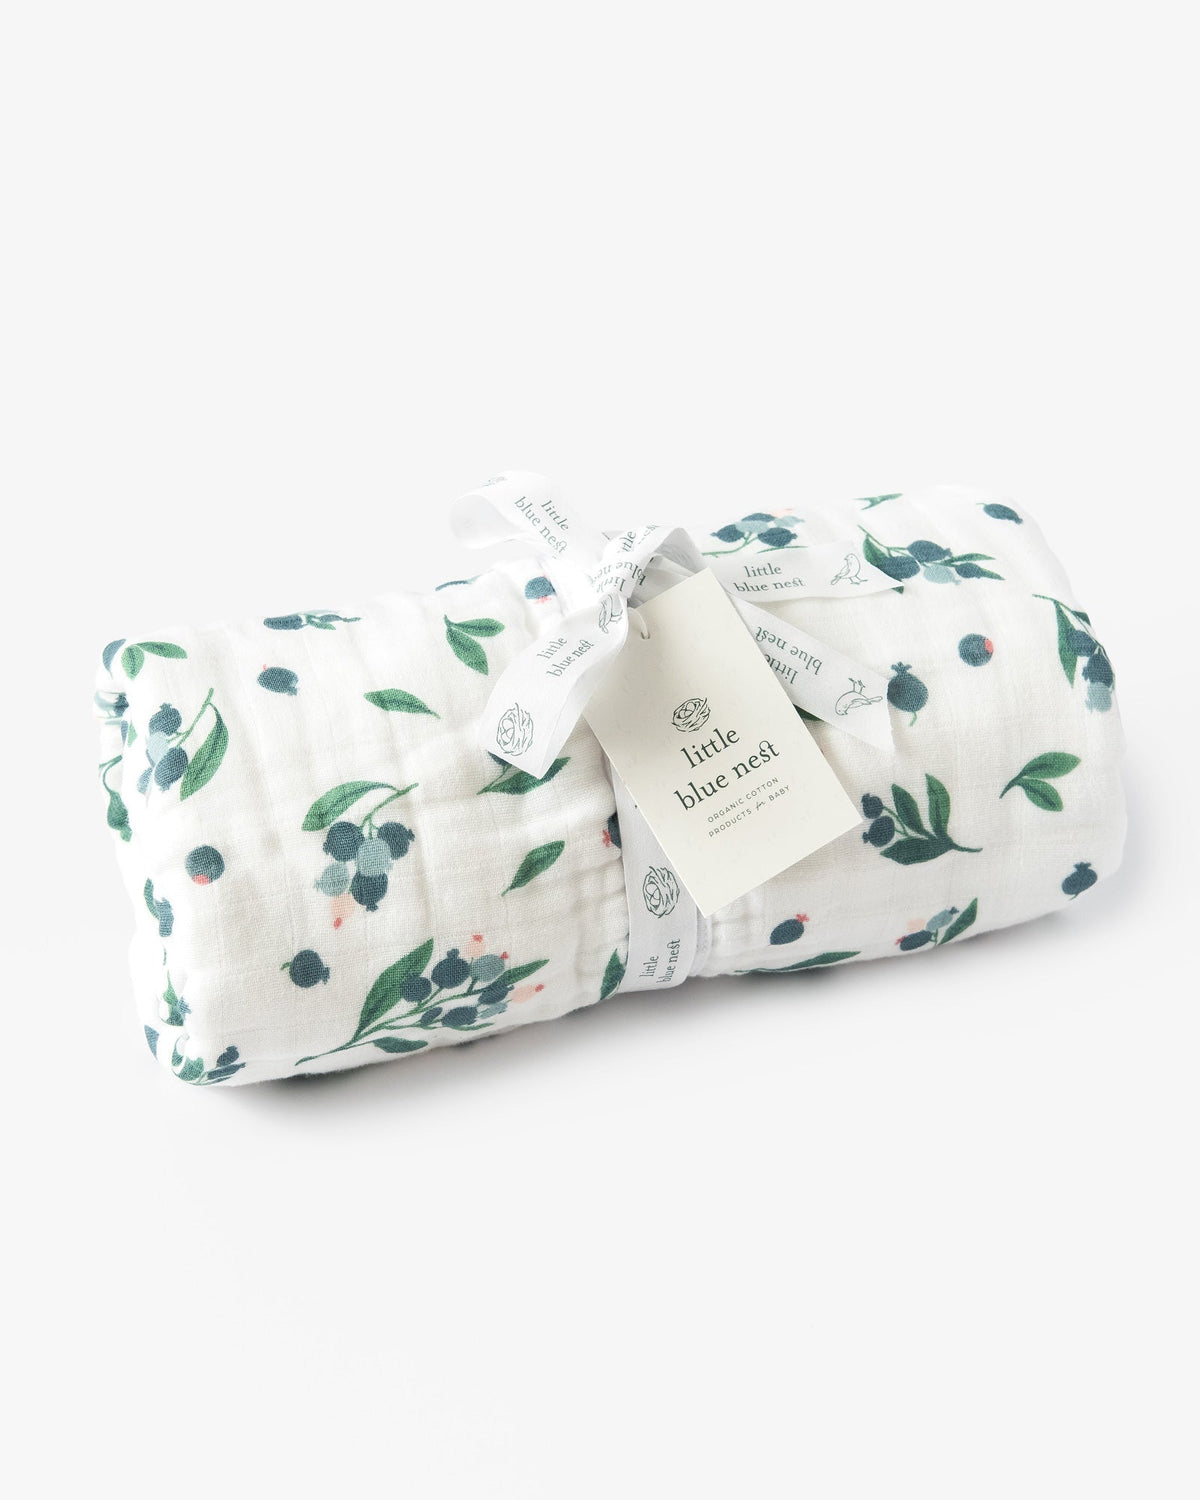 Organic cotton muslin baby sleeping bag 1.5 tog with Little Blue Nest packaging